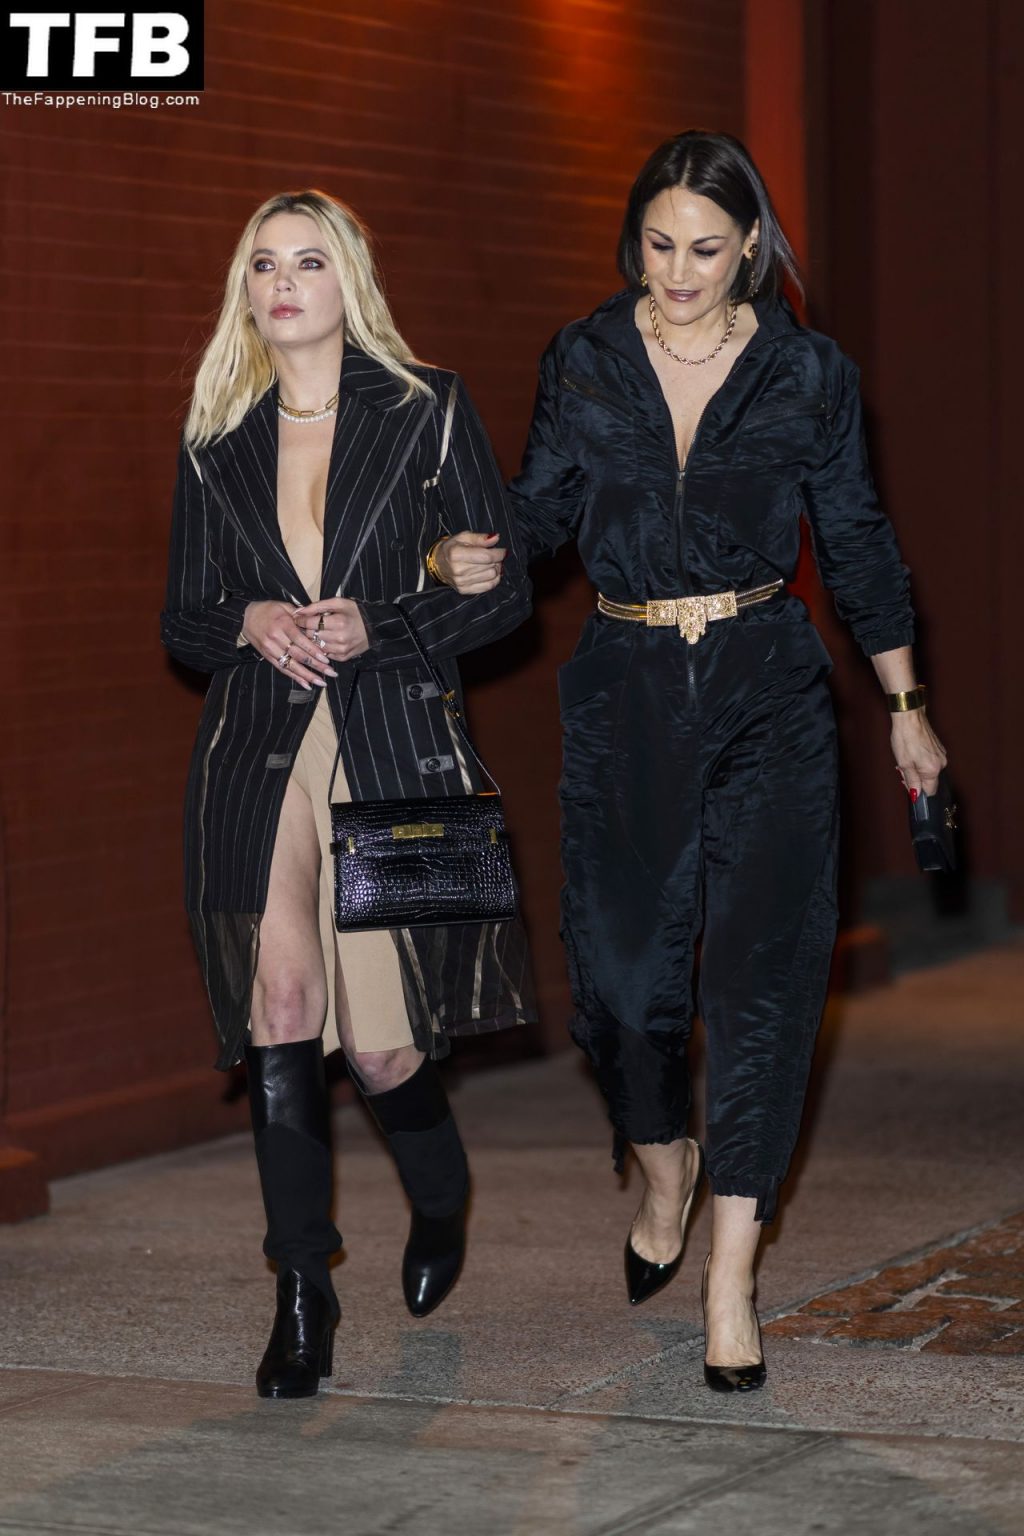 Ashley Benson and a Girlfriend Look Fashionable as They Head to Dinner in NYC (5 Photos)